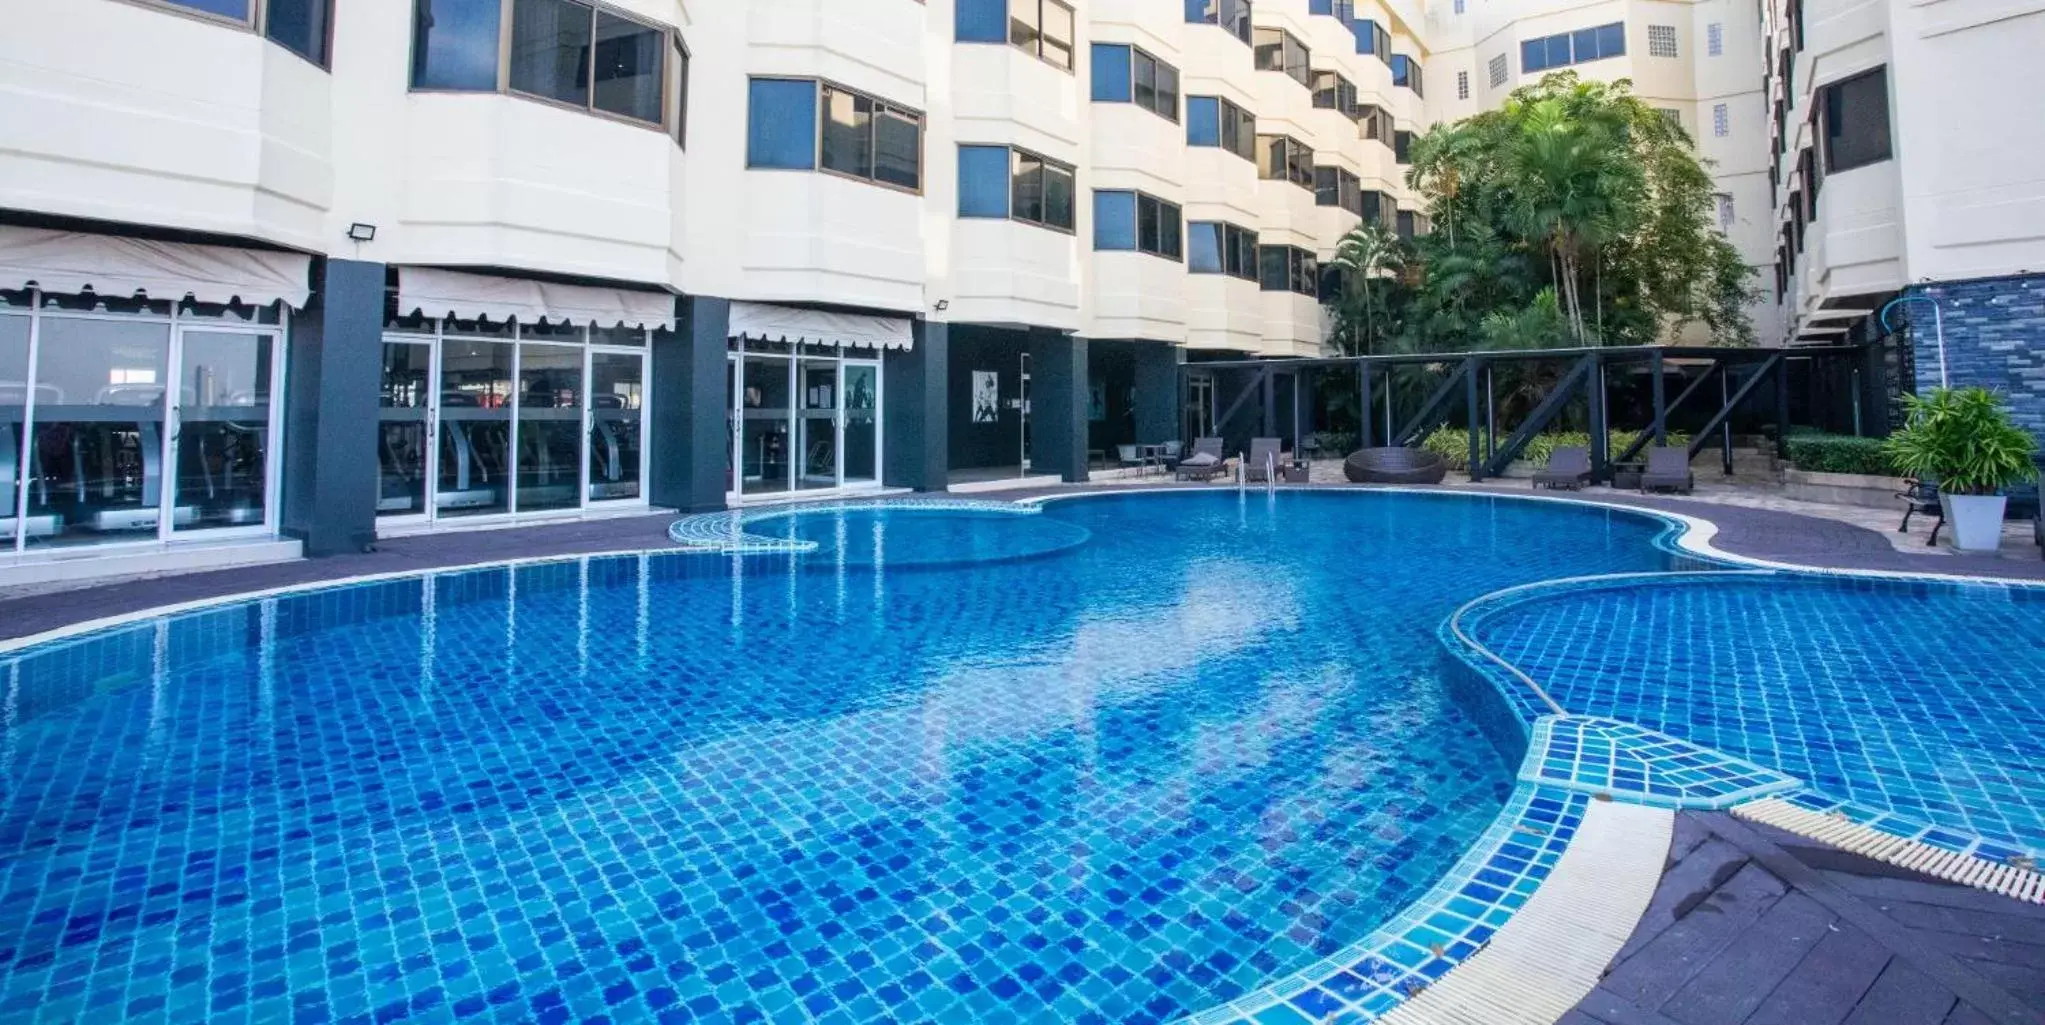 Swimming Pool in Star Convention Hotel (Star Hotel)